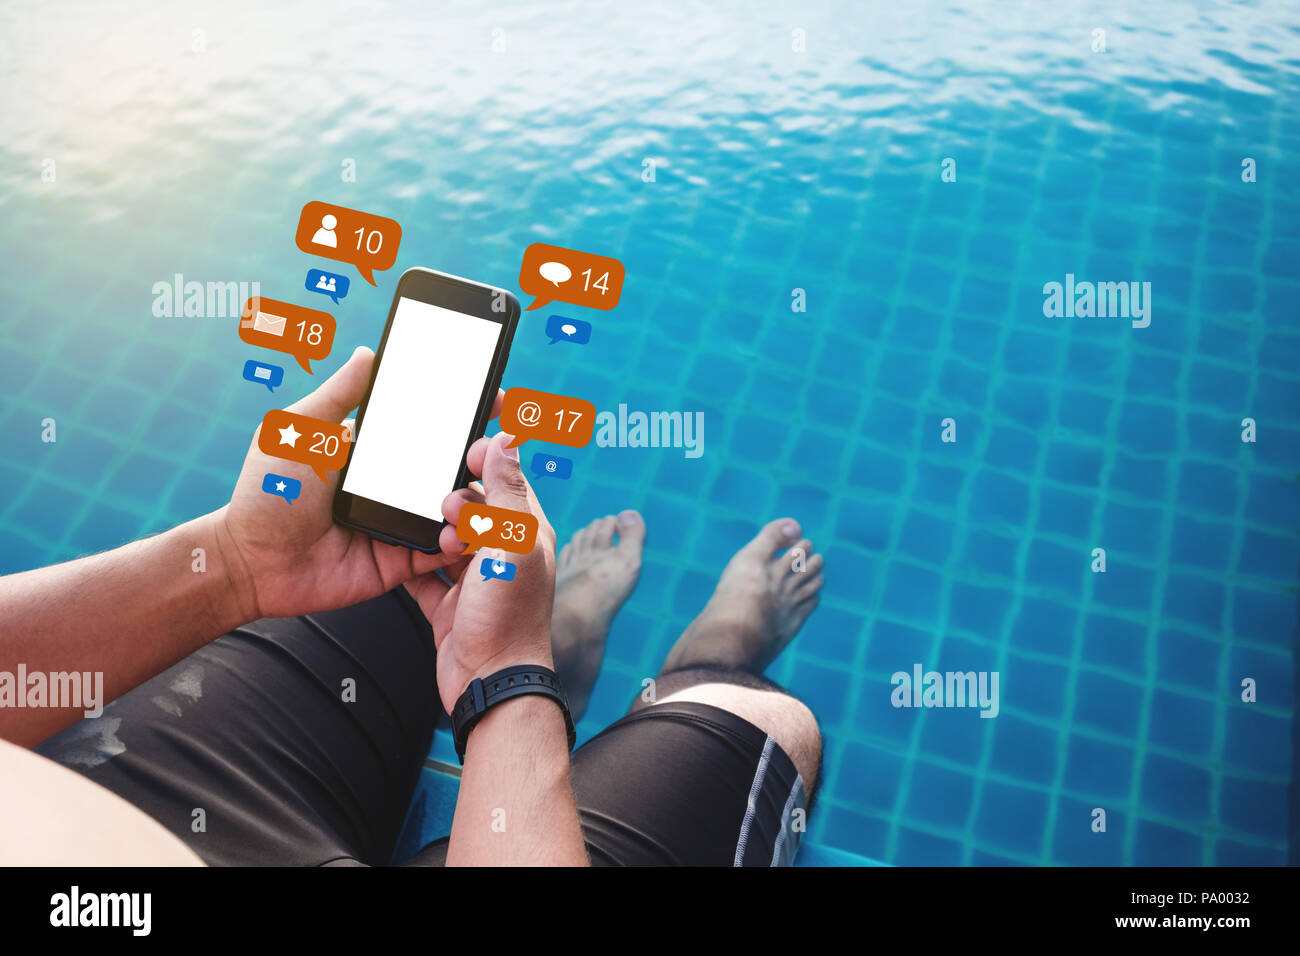 a man using mobile phone at poolside in summer with social media and online message notification icons, blank white screen Stock Photo